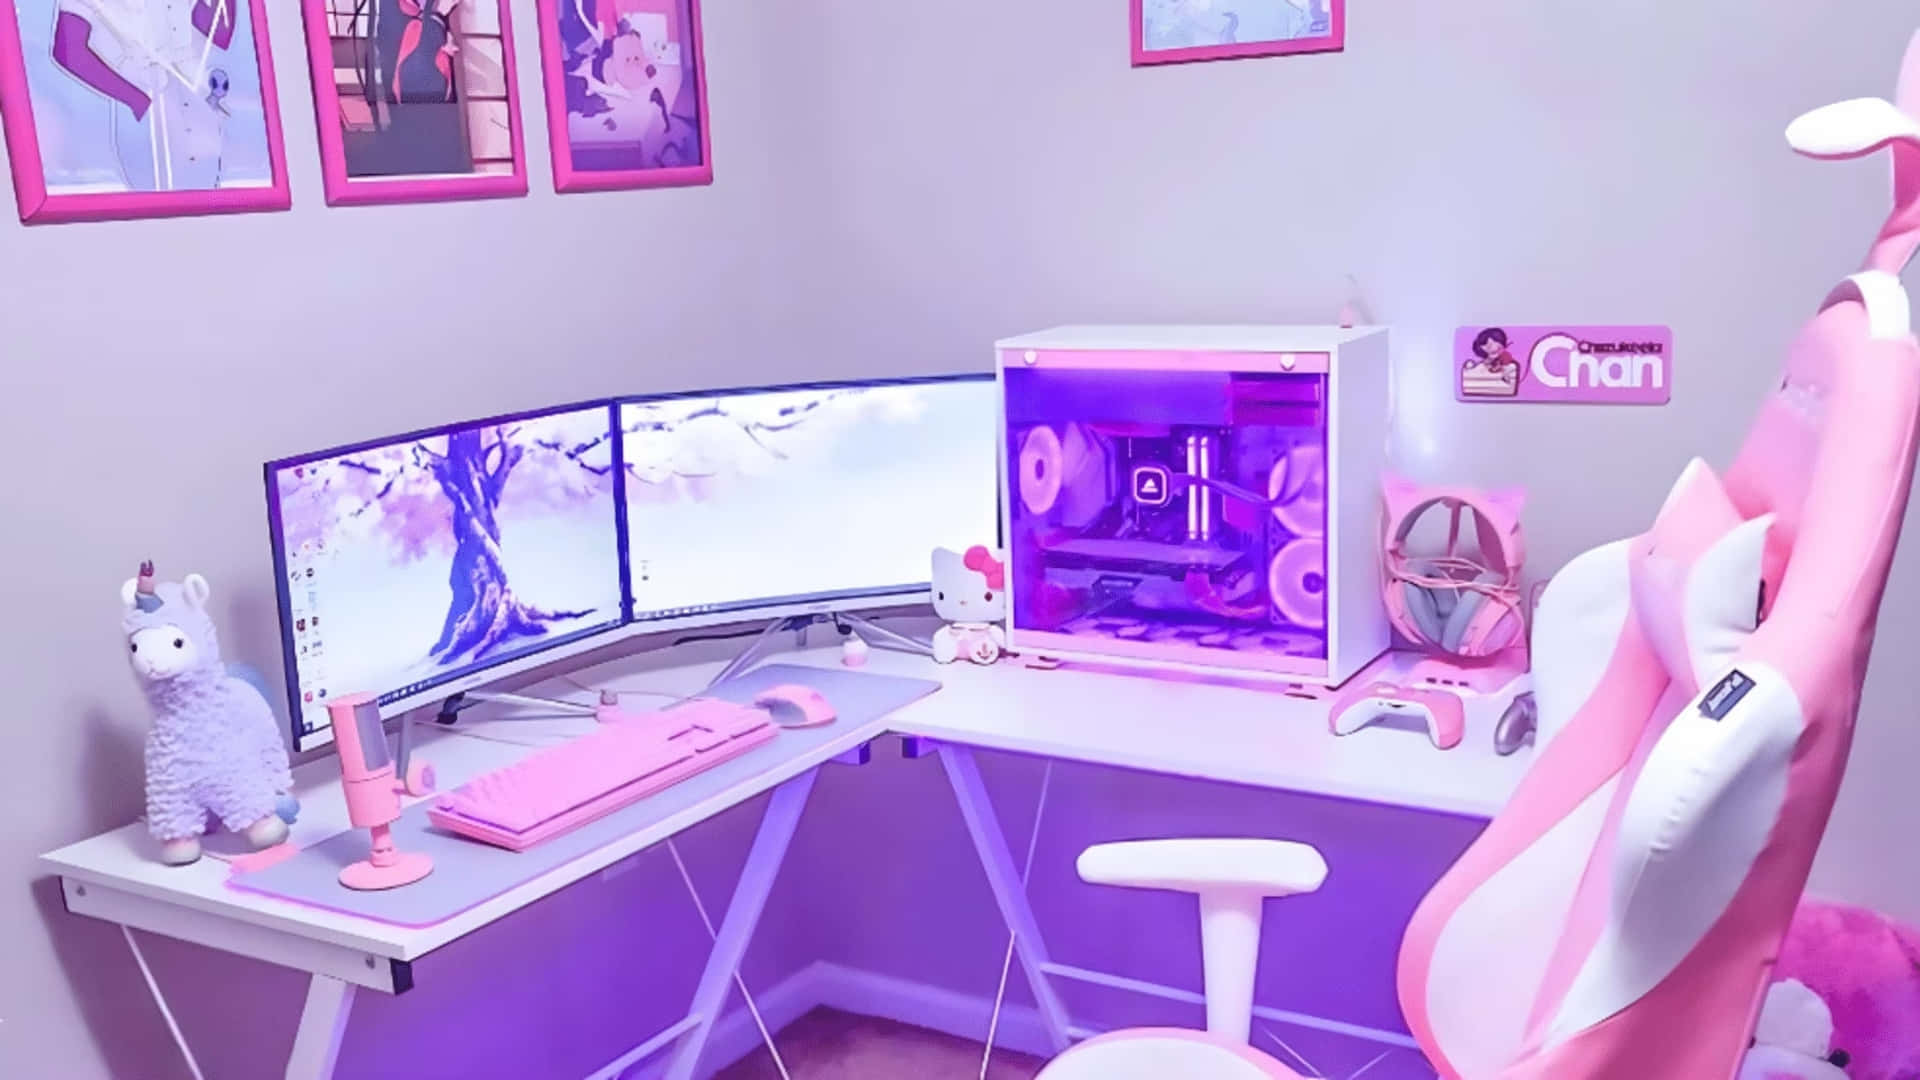 Aesthetic Kawaii Room with pastel colors and plushies Wallpaper